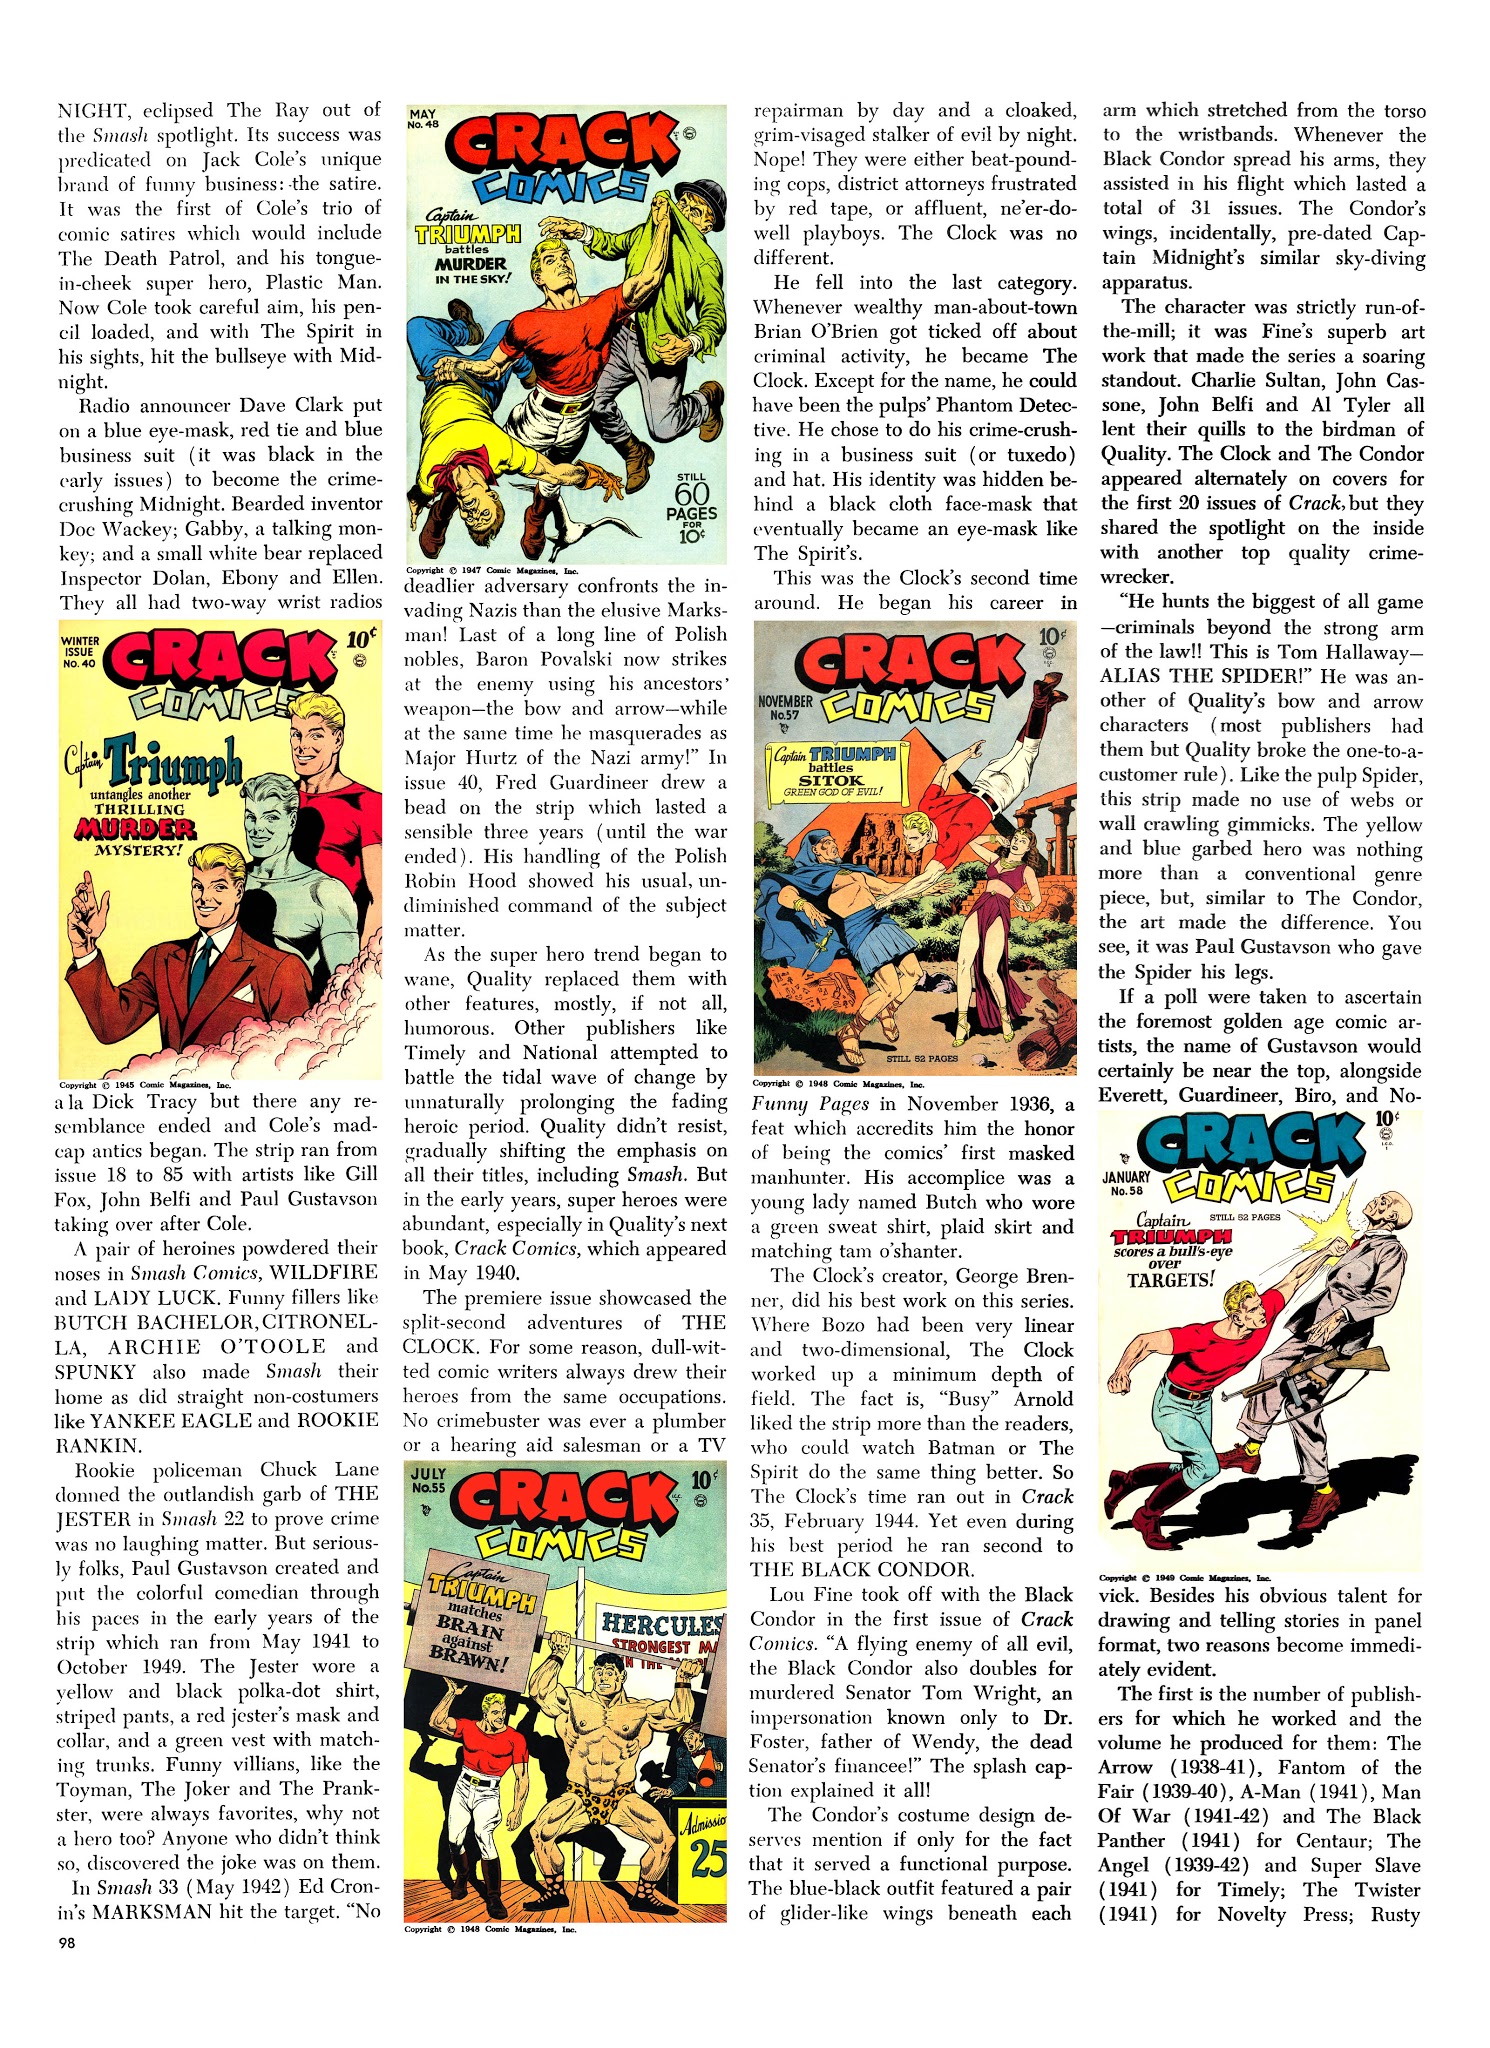 Read online The Steranko History of Comics comic -  Issue # TPB 2 - 97